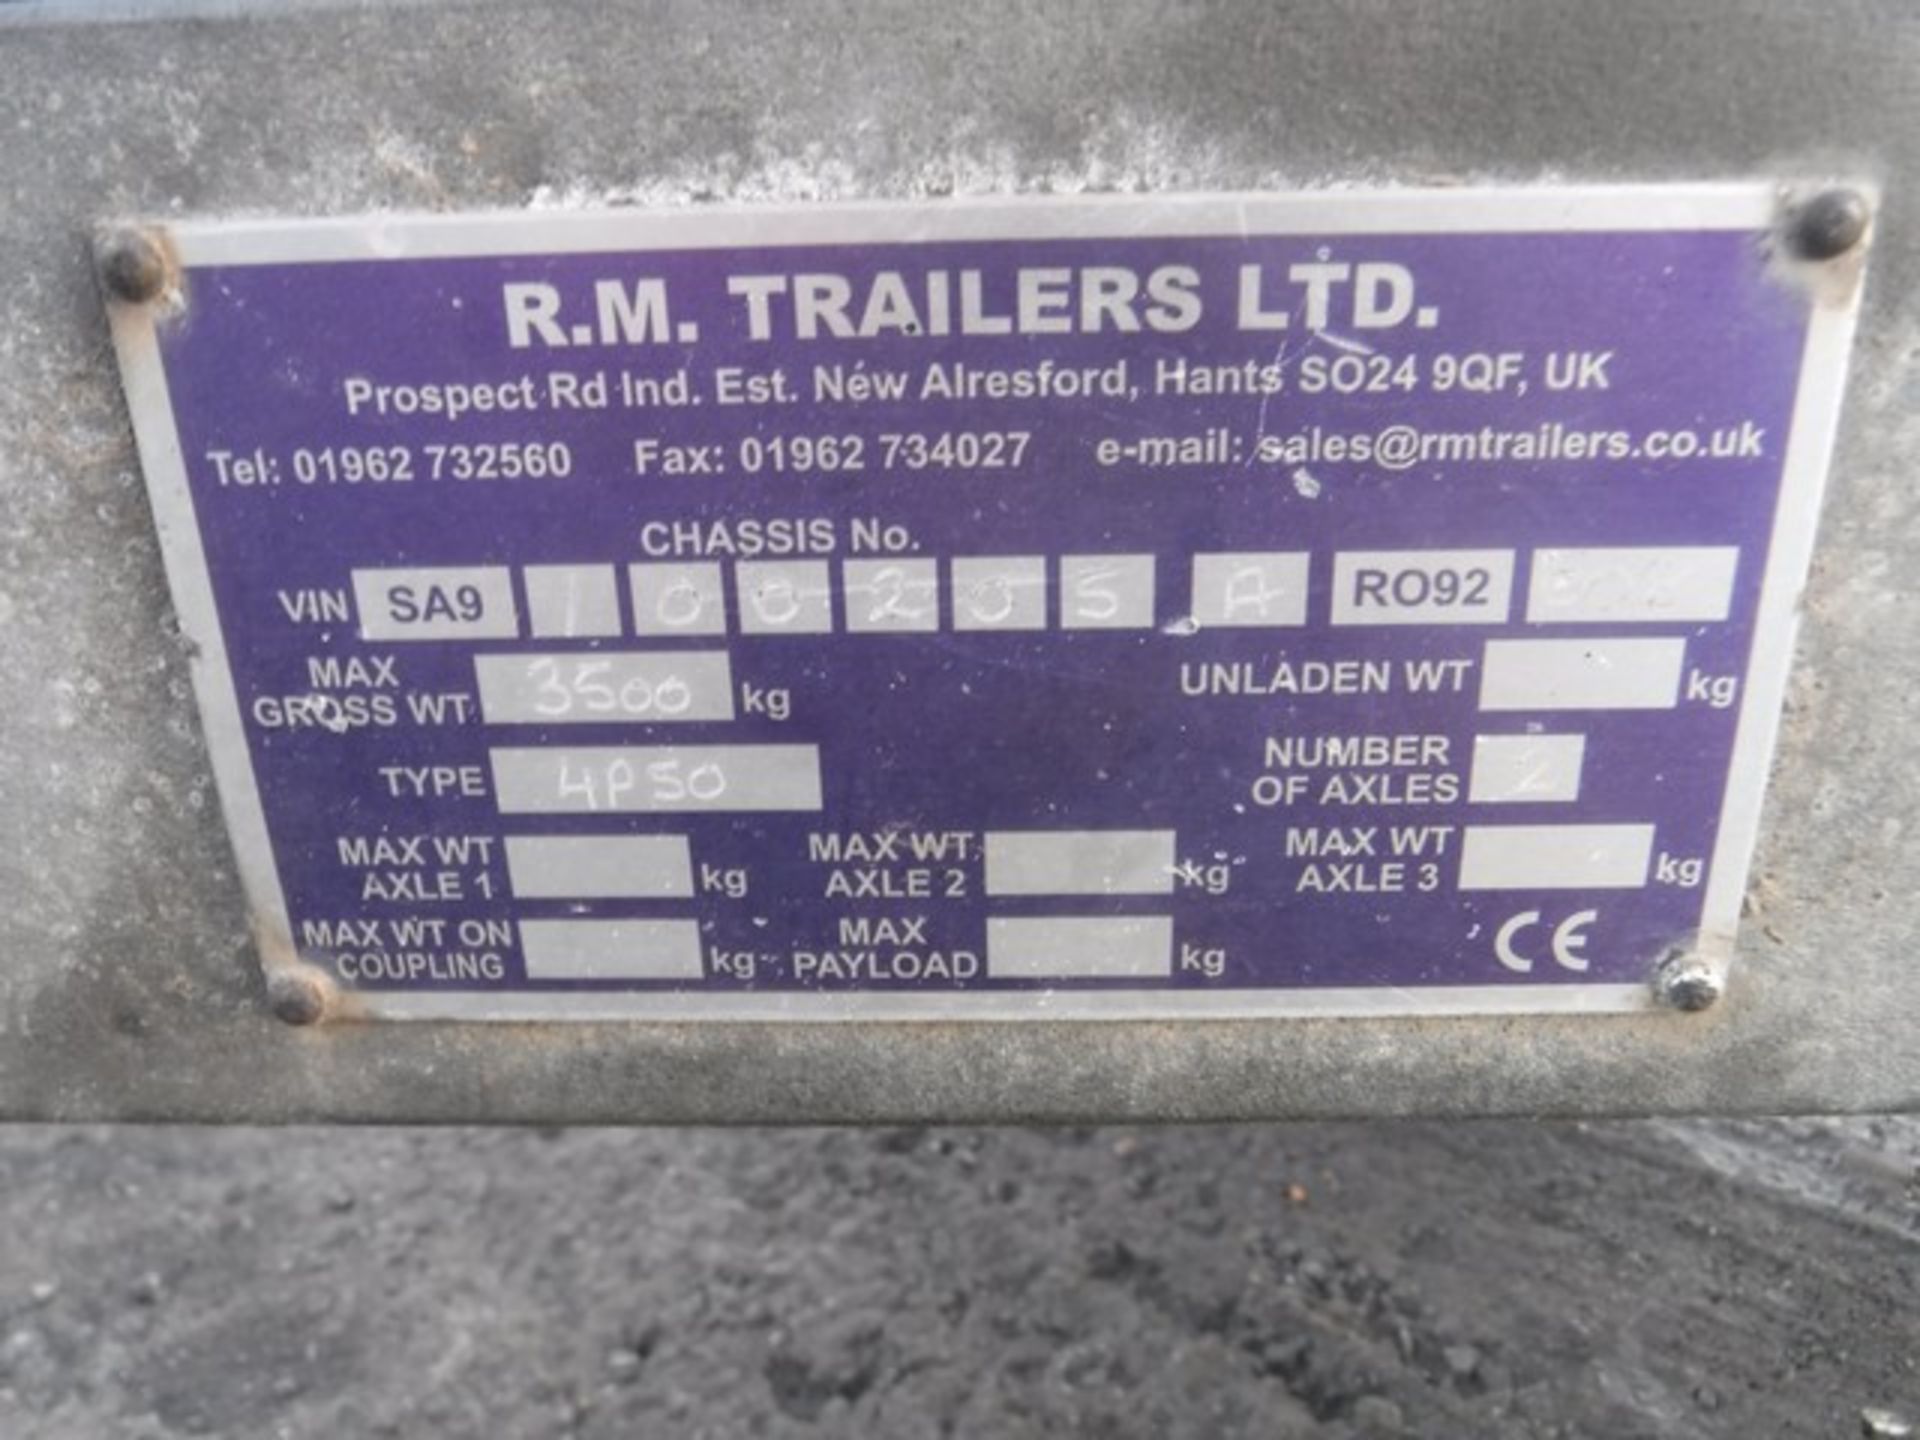 Generator **ENGINE ONLY** on twin axle trailer. Generator and control box have been removed ID no. 1 - Image 11 of 11